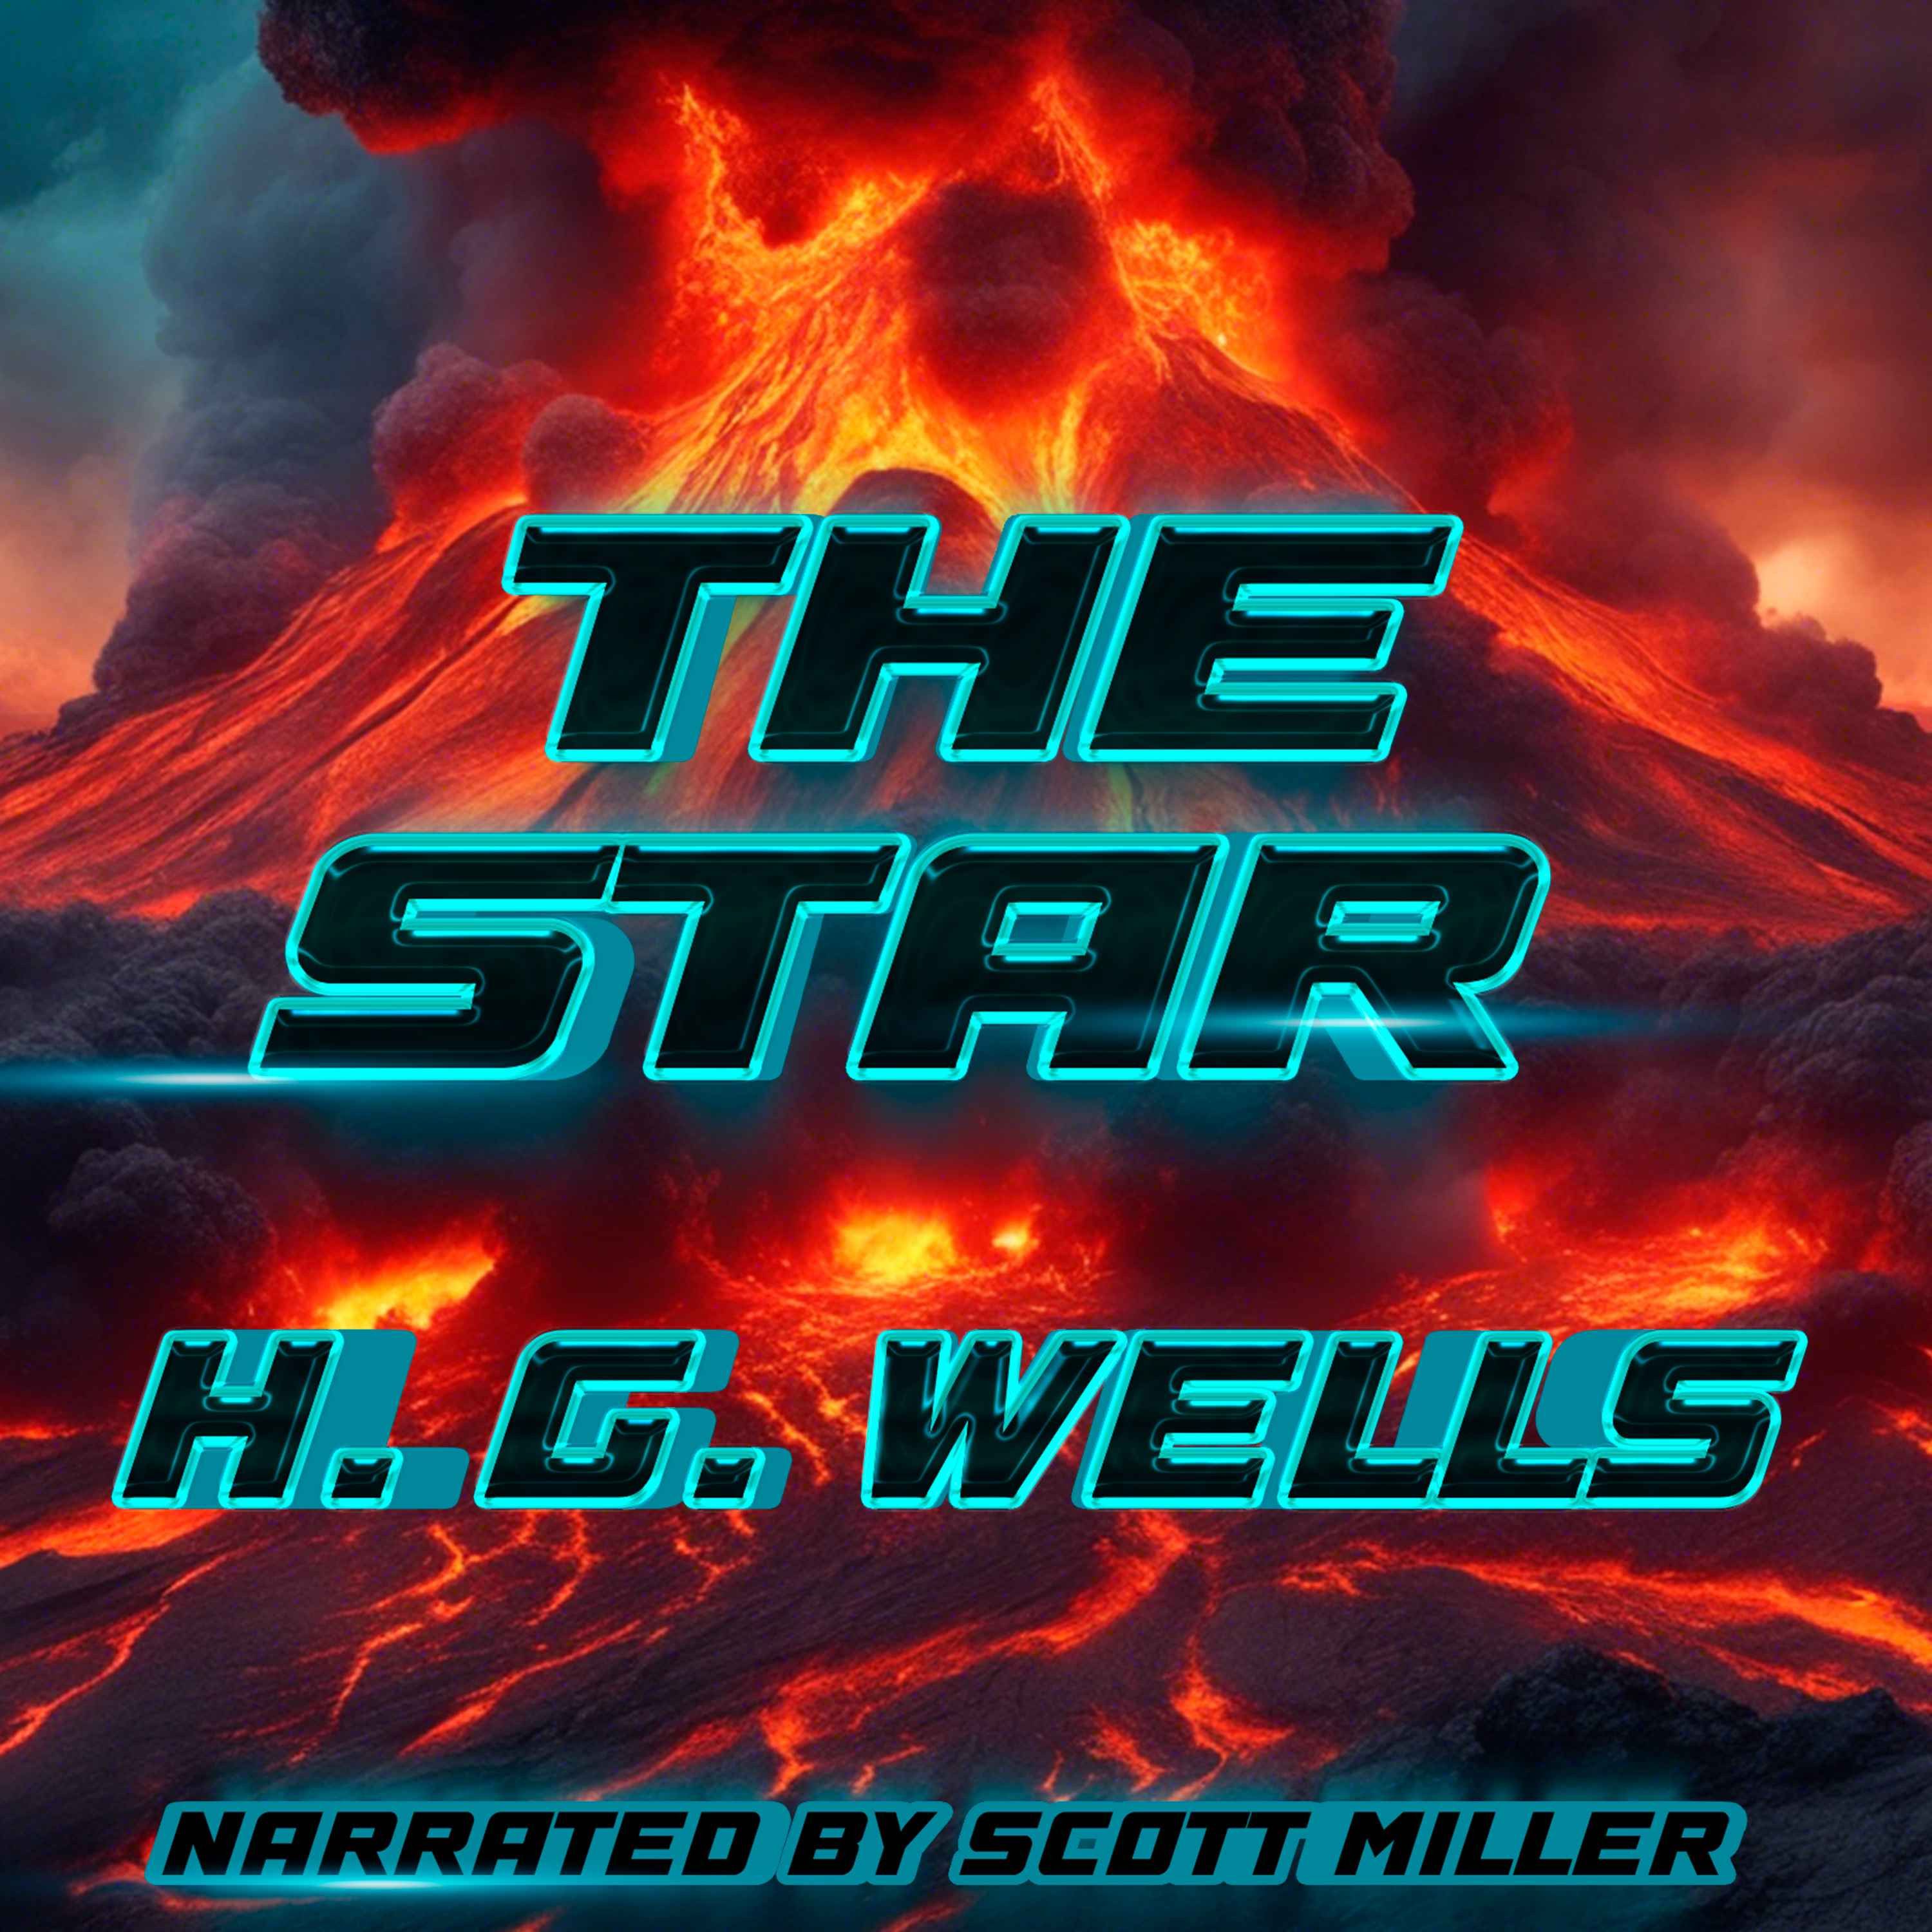 The Star by H. G. Wells - Sci-Fi Short Story From the 1800s